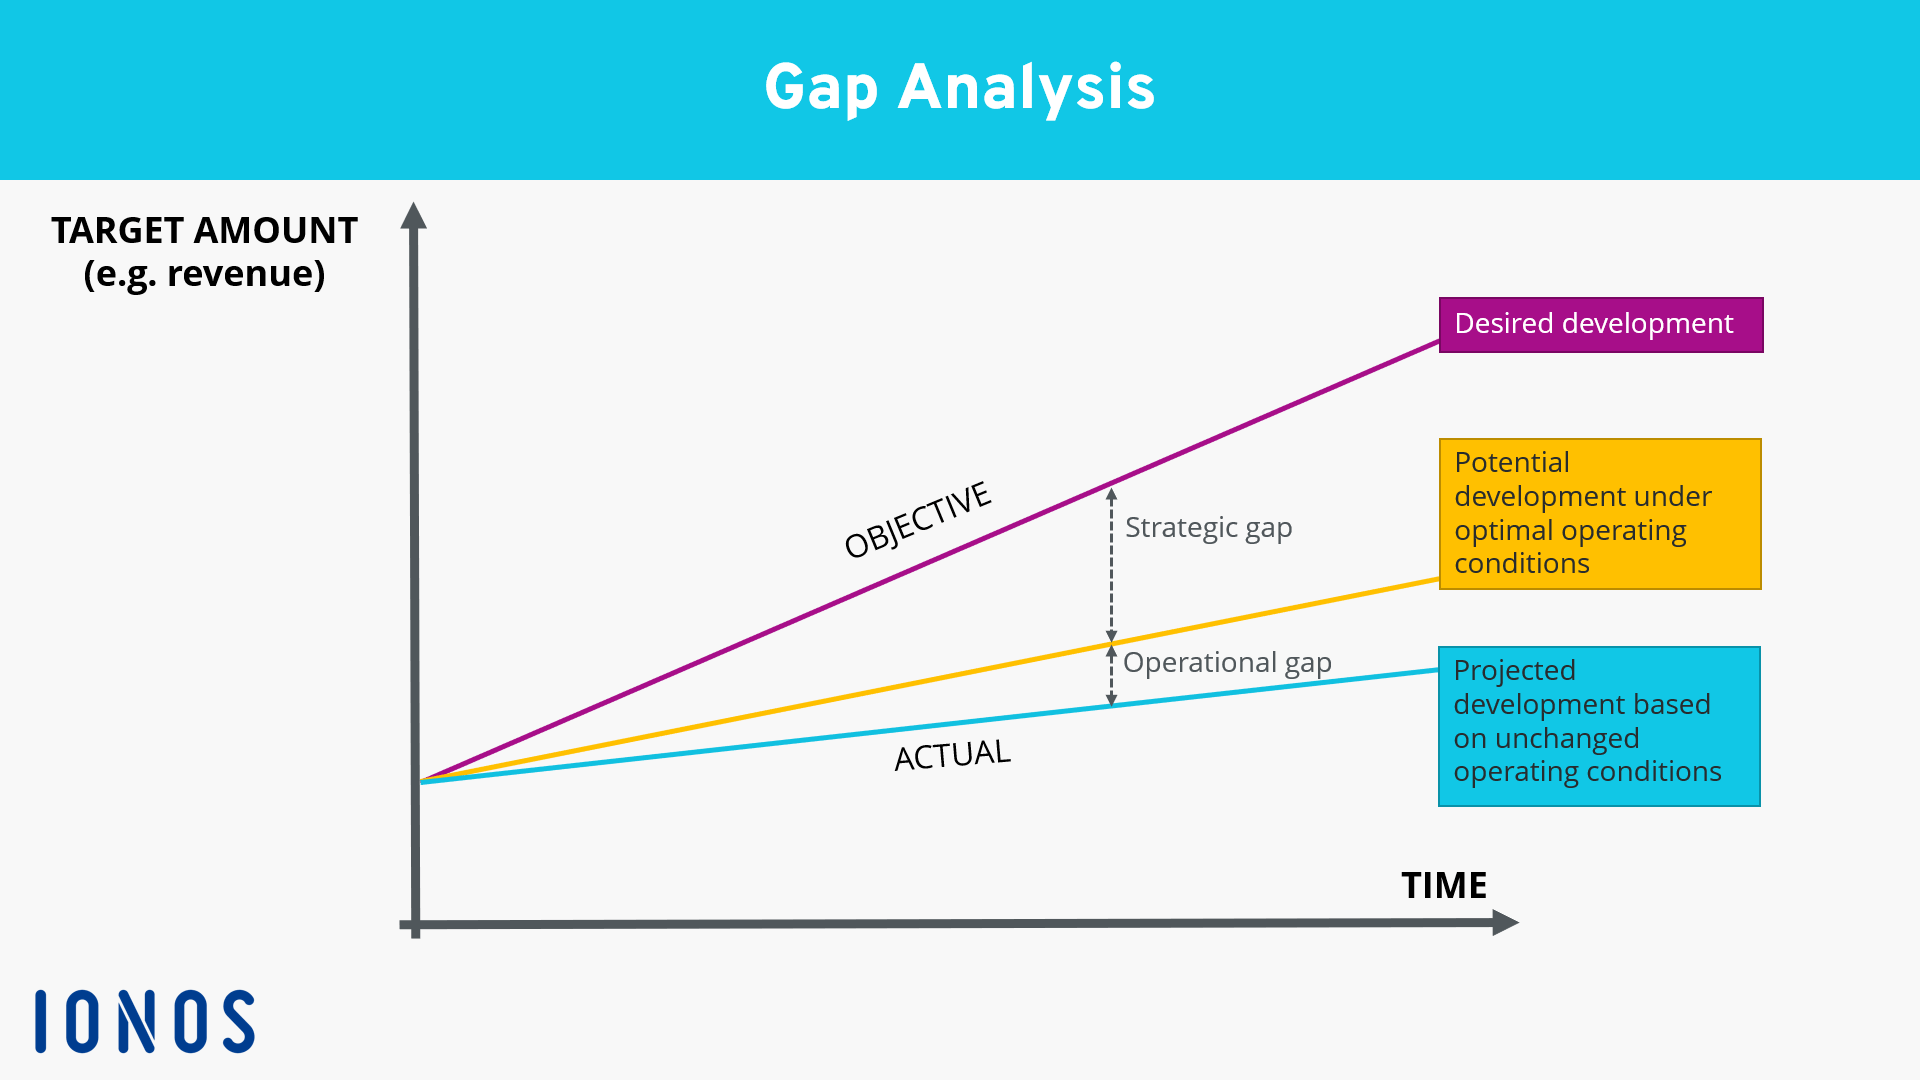 A graph showing gap analysis in a coordinate system